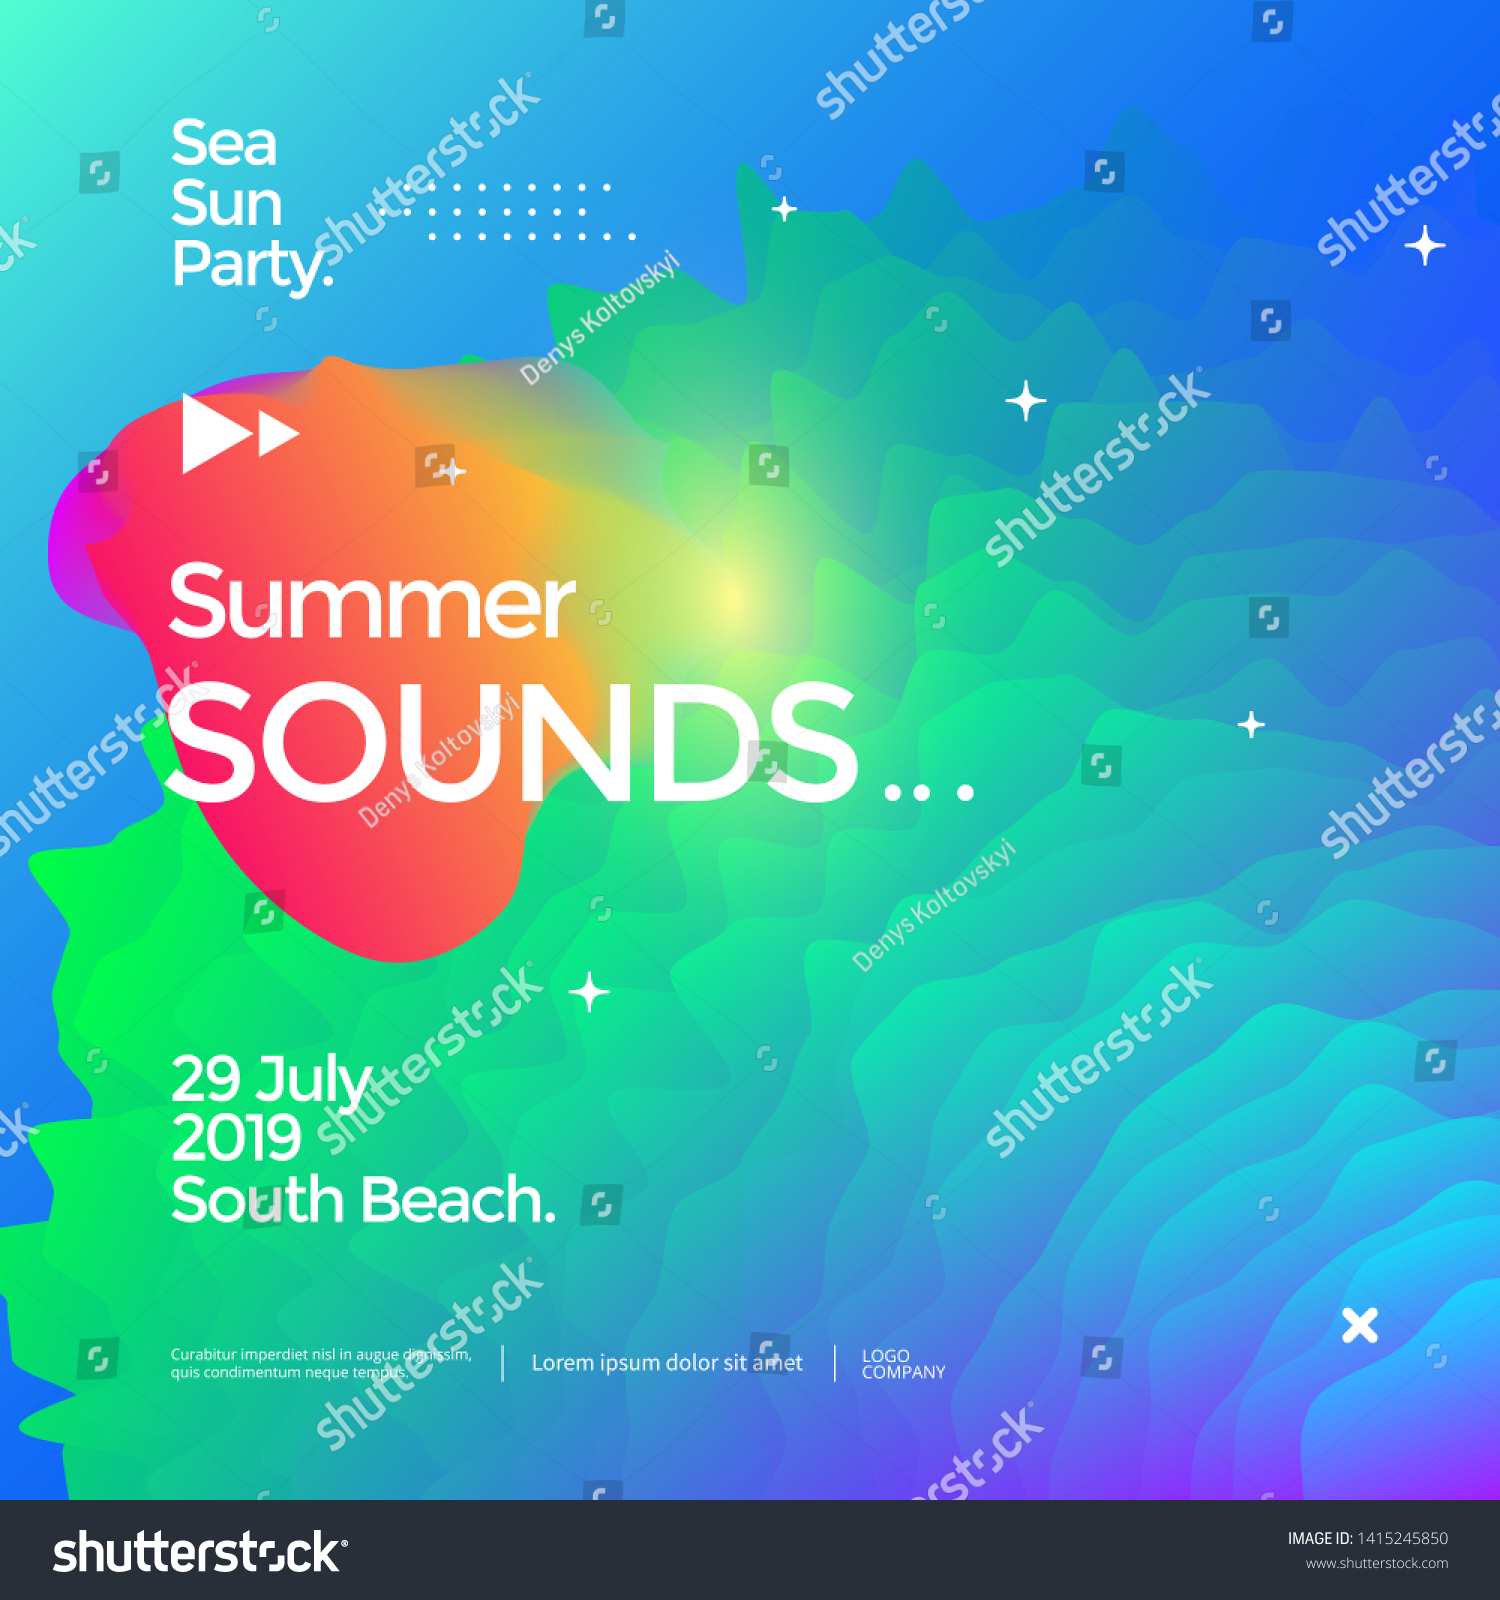 Summer Sounds Electronic Music Fest Poster Stock Vector (Royalty Free